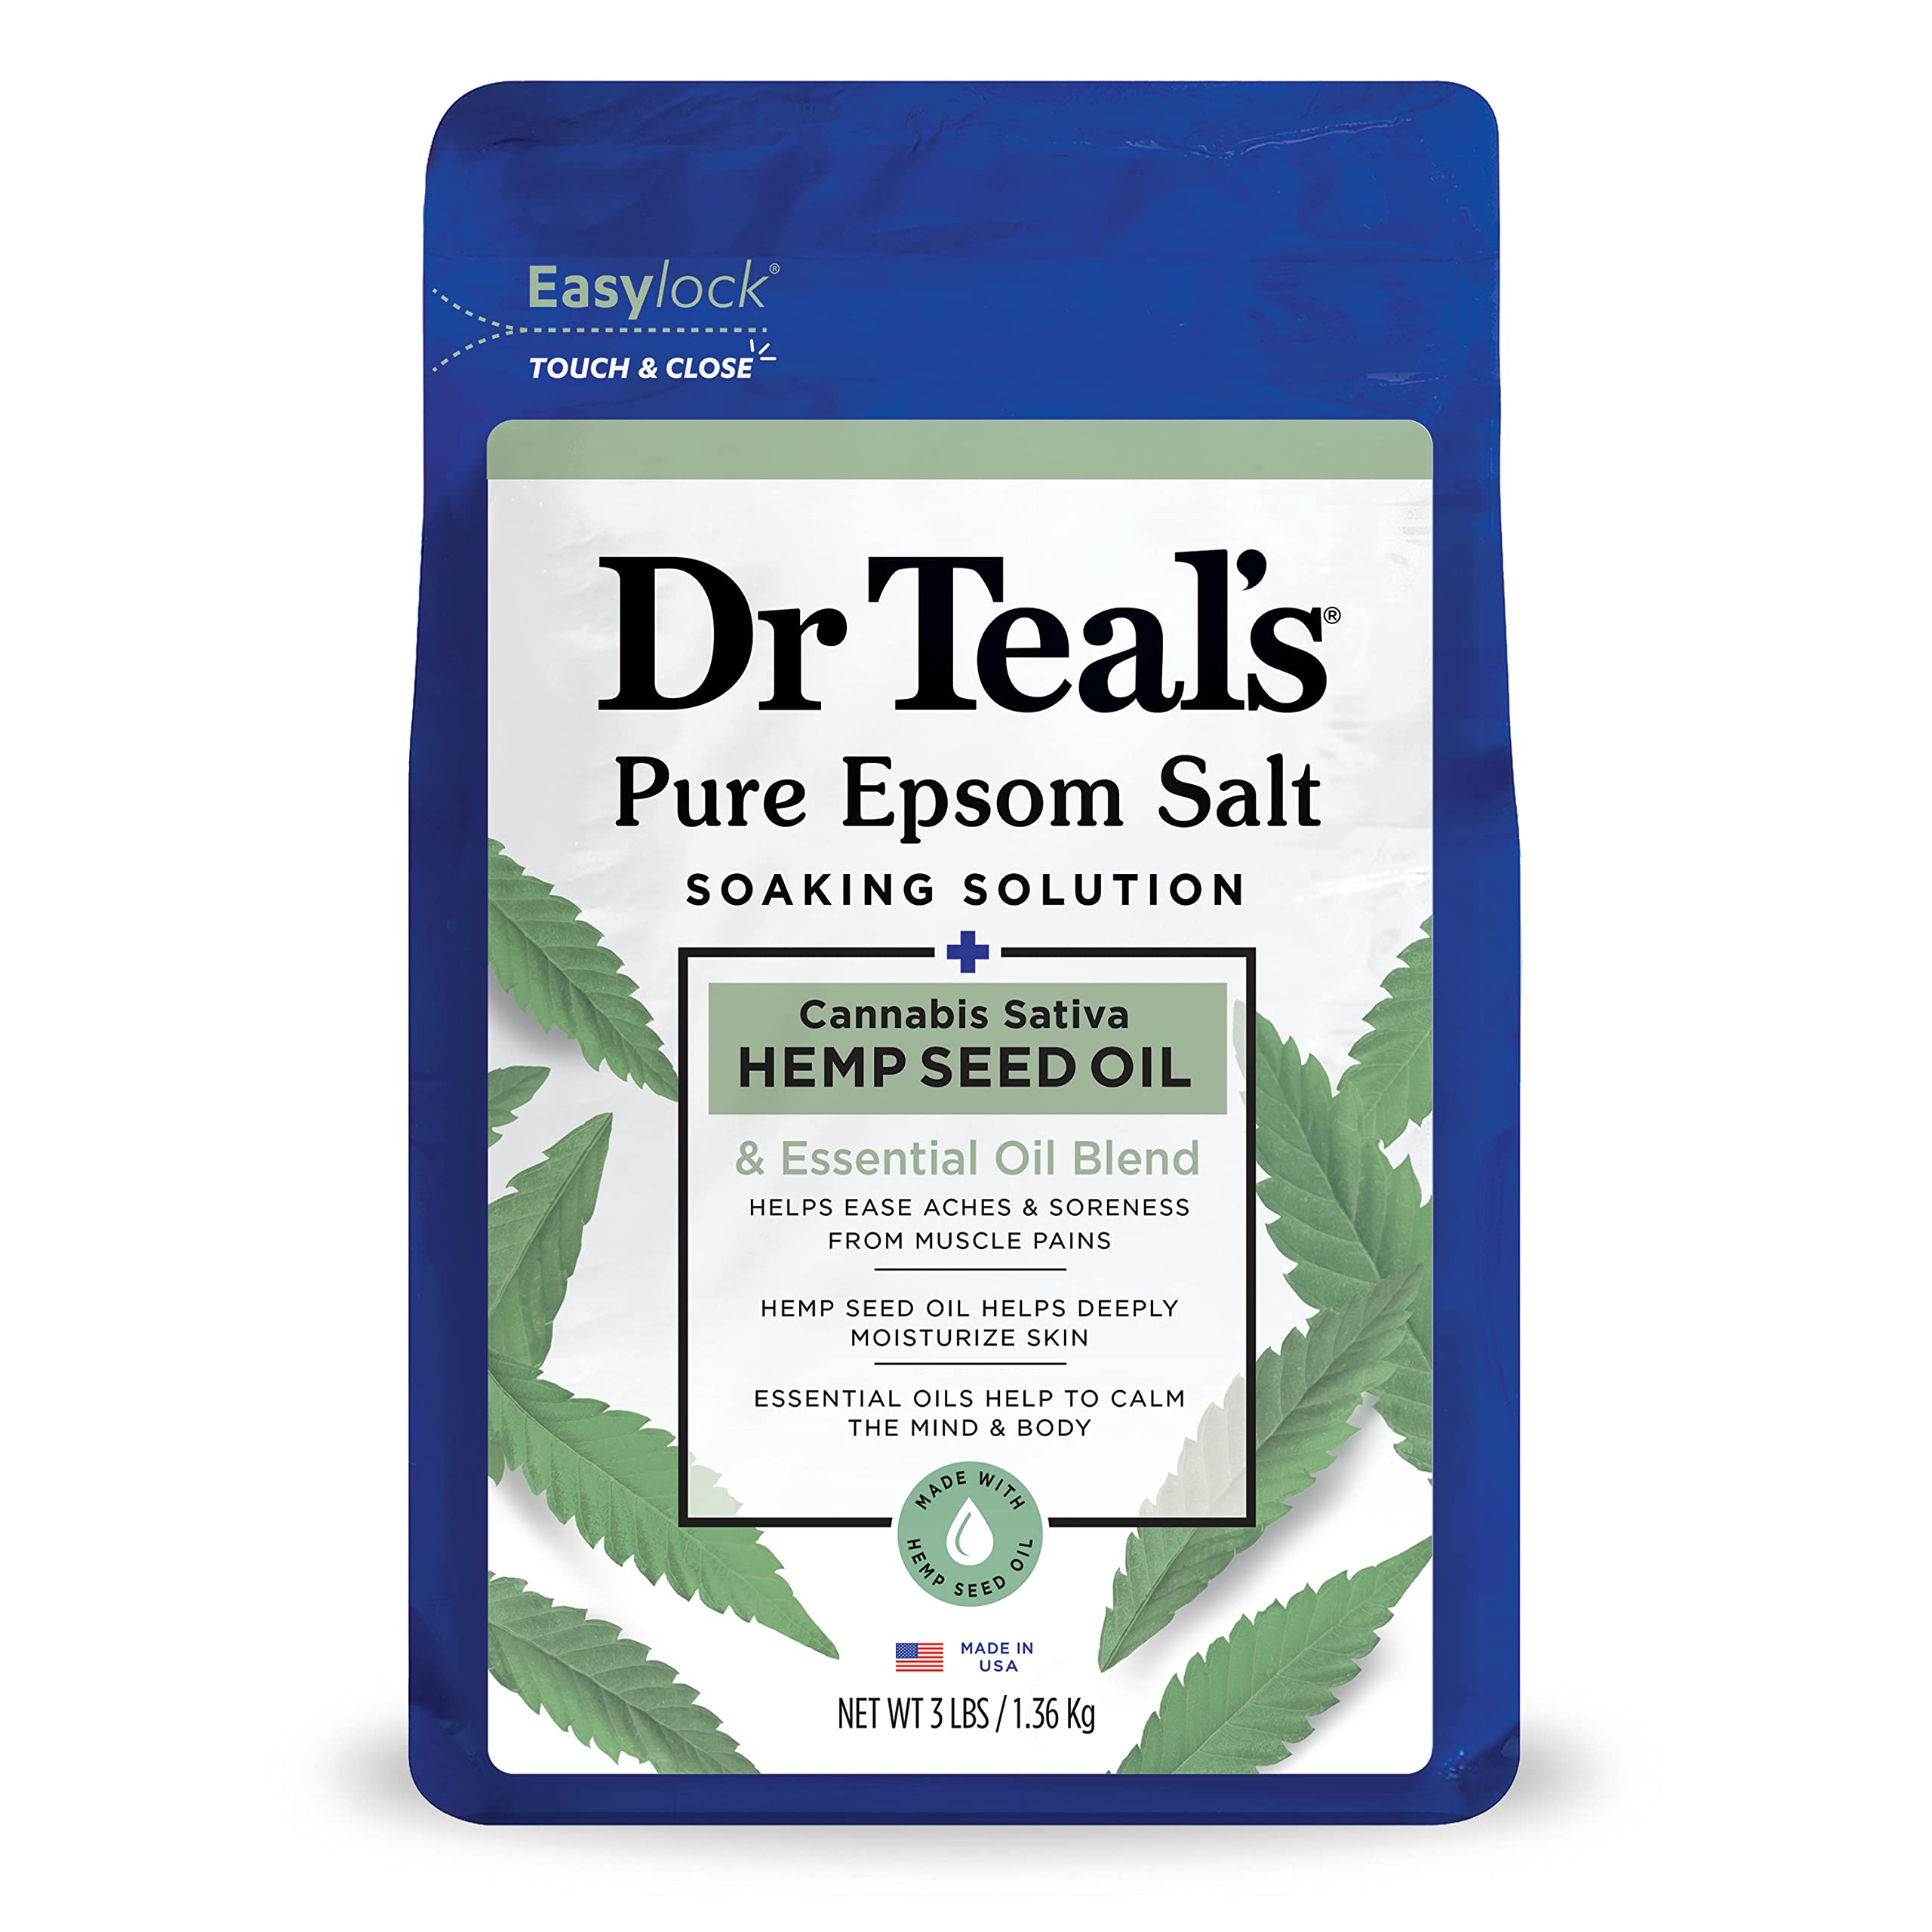 Dr Teal's Pure Epsom Salt Soak, Cannabis Sativa Hemp Seed Oil with Essential Oil Blend, 3 lbs (Packaging May Vary)